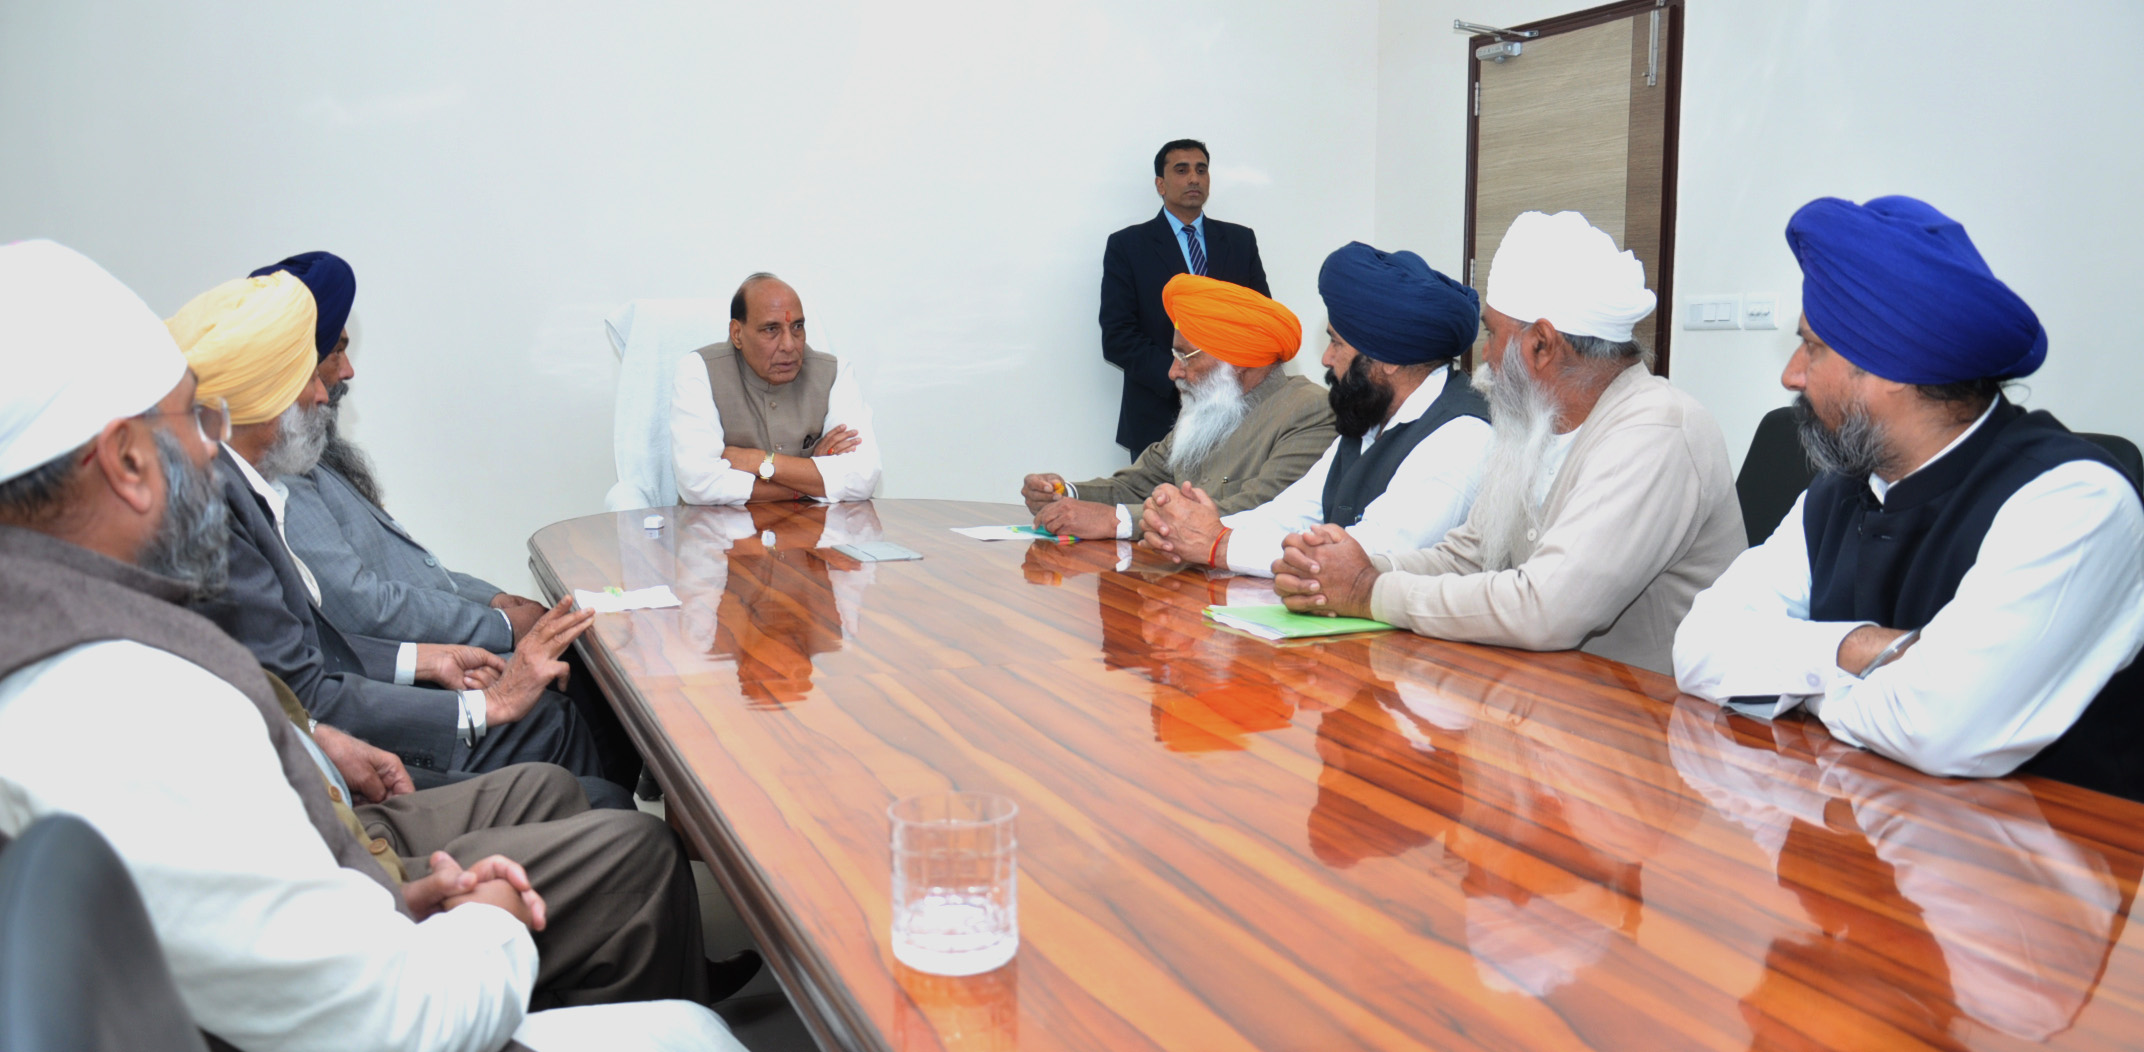 A delegation of the Members of Parliament and other leaders from Punjab meeting the Union Home Minister, Shri Rajnath Singh, in New Delhi on February 04, 2016.